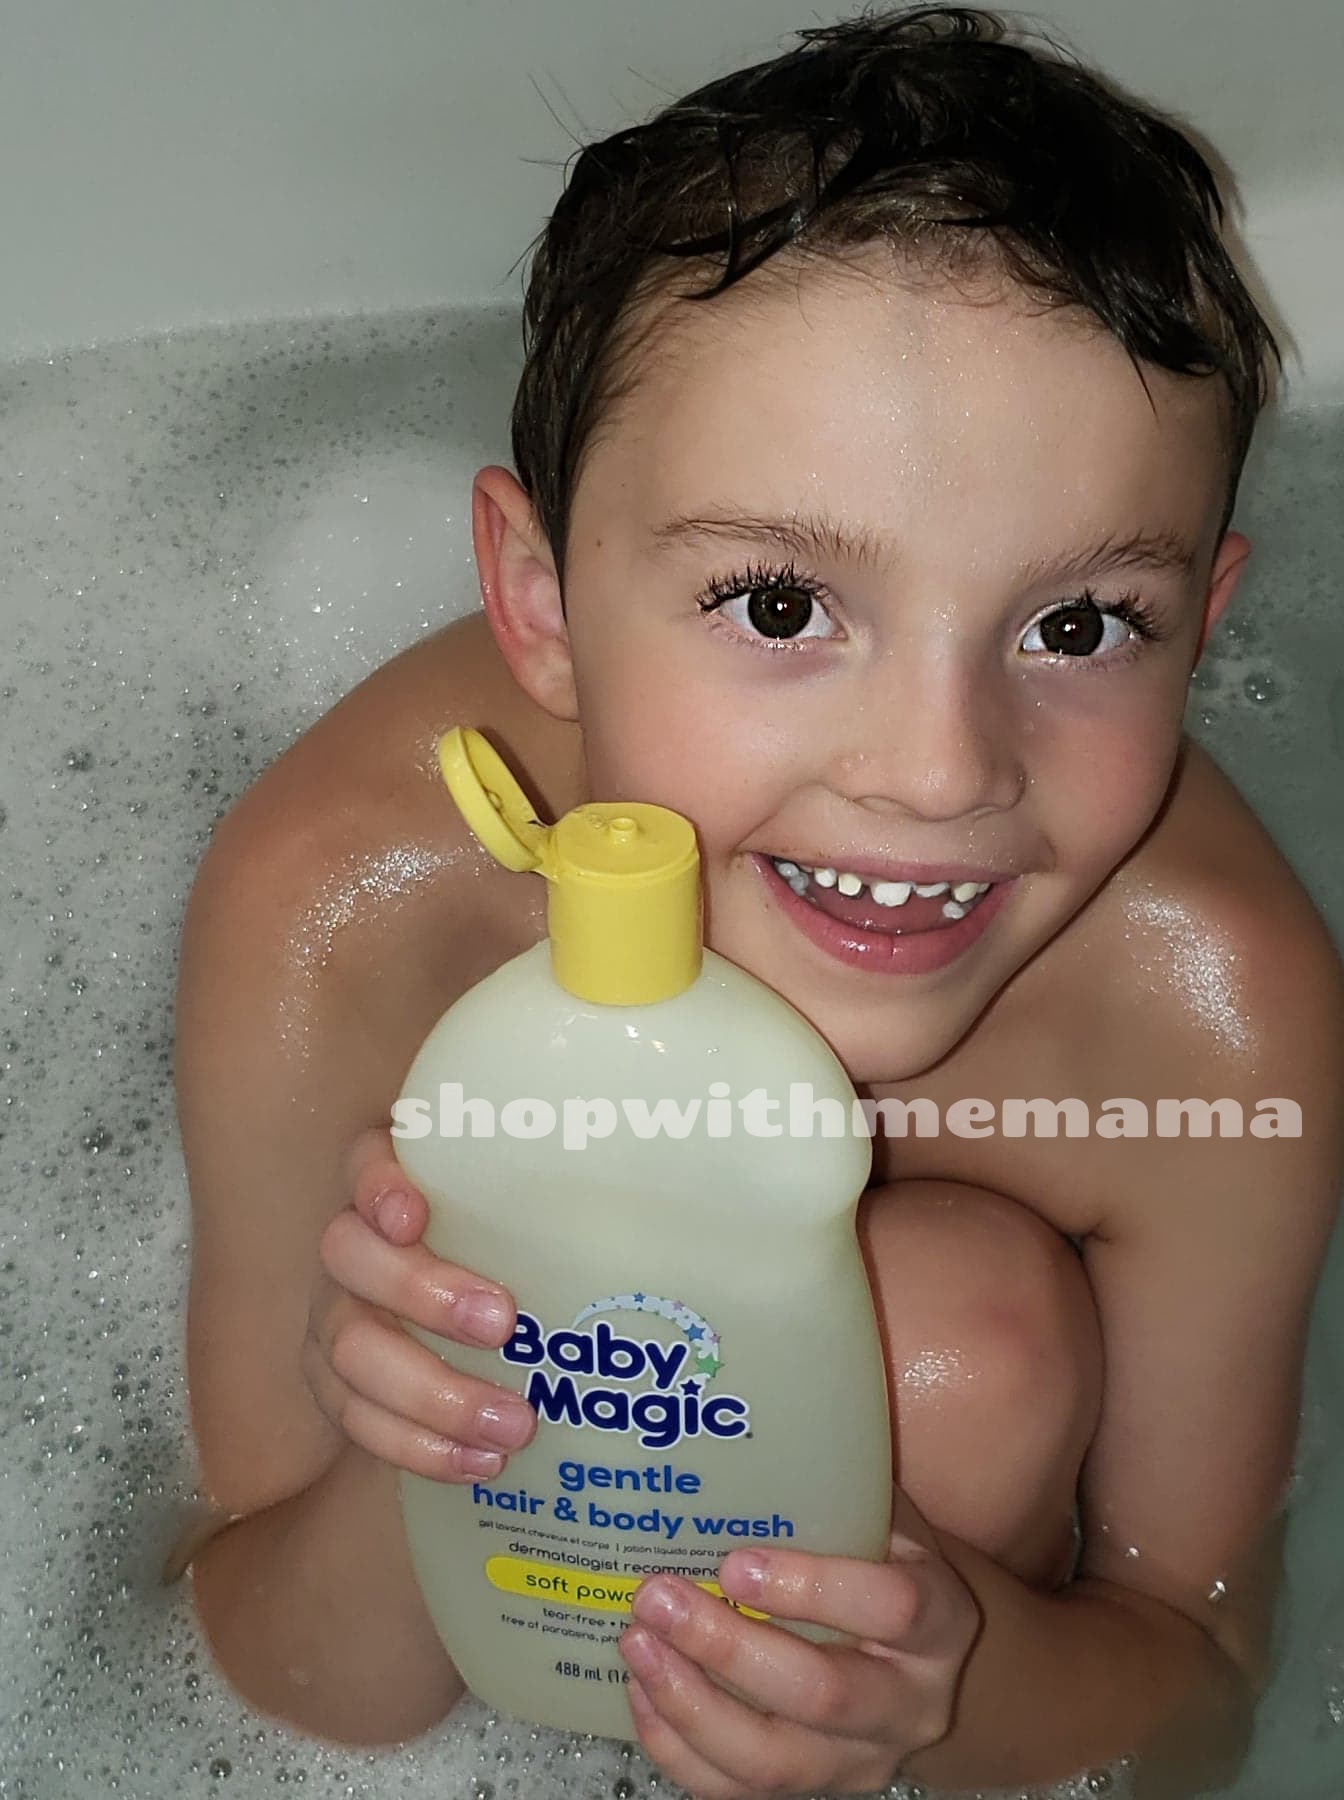 Baby Magic Lotion, Body Wash And More!